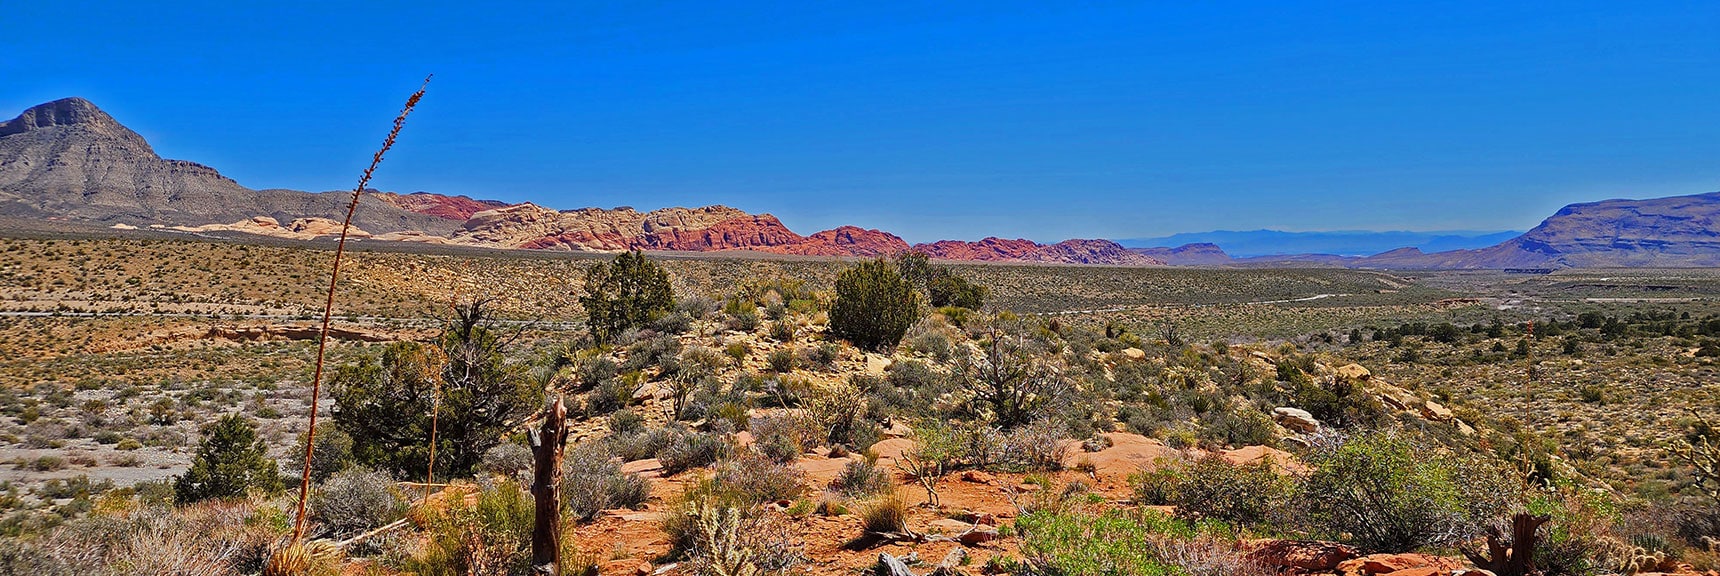 View Across Red Rock Canyon to Calico Hills (Left); Blue Diamond Hill (Right) | SMYC Trail | Red Rock Canyon National Conservation Area, Nevada | David Smith | LasVegasAreaTrails.com